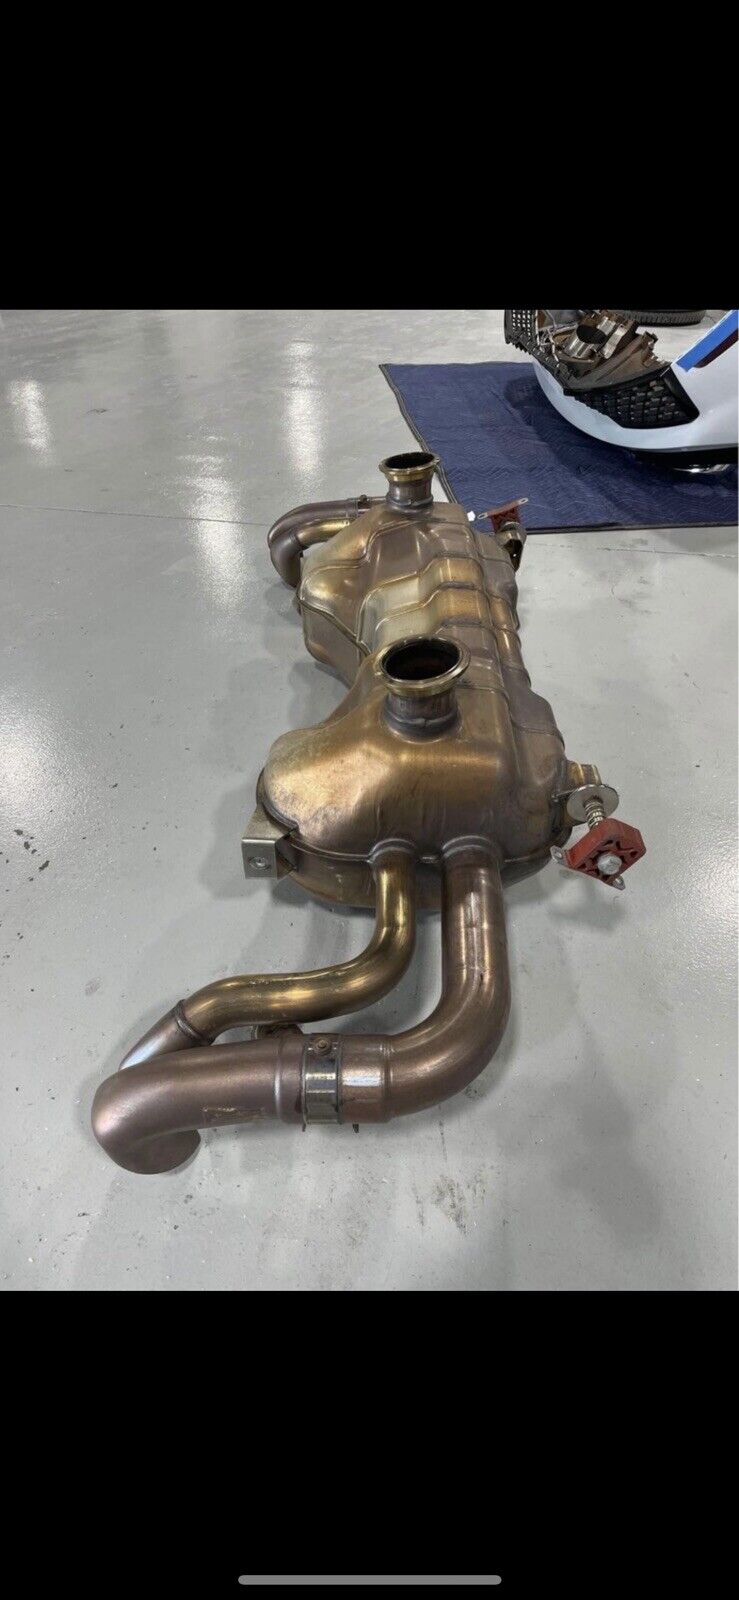 OEM valved exhaust off of a 2009 Audi R8. Good used condition no damage